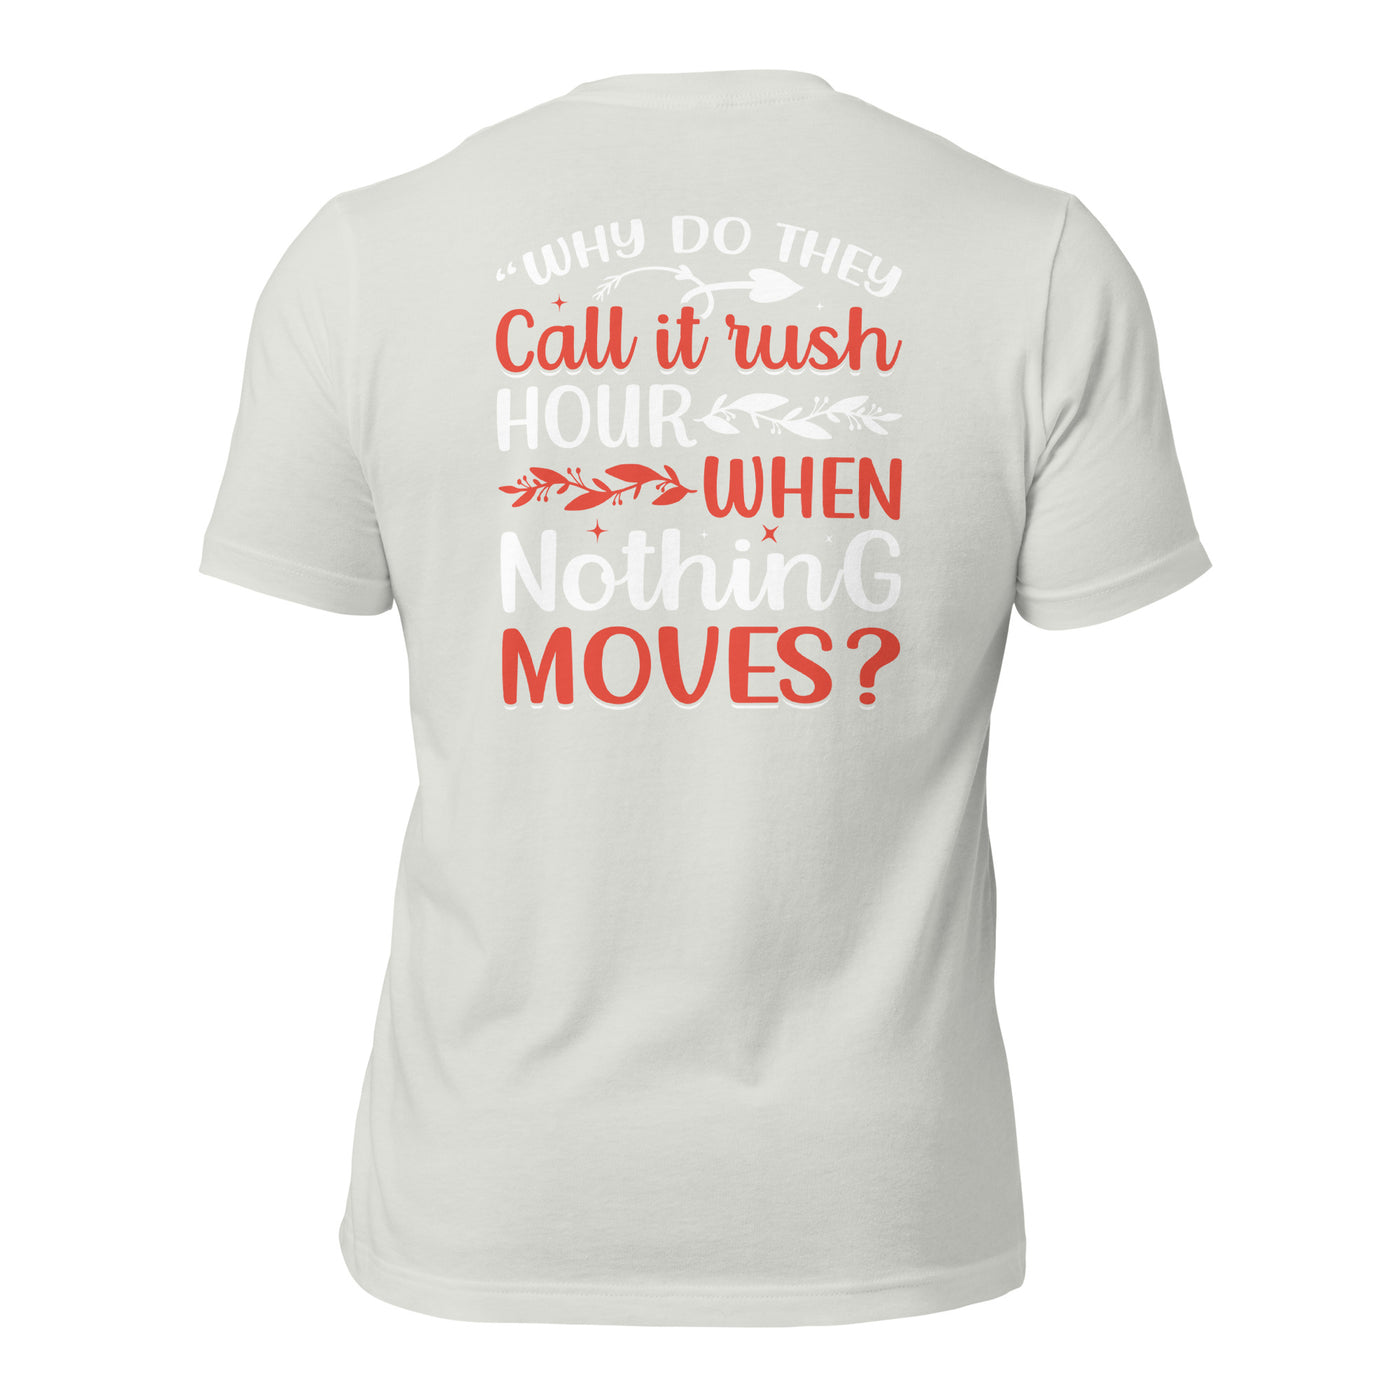 Why do they say Wish Hours, when nothing moves? - Unisex t-shirt